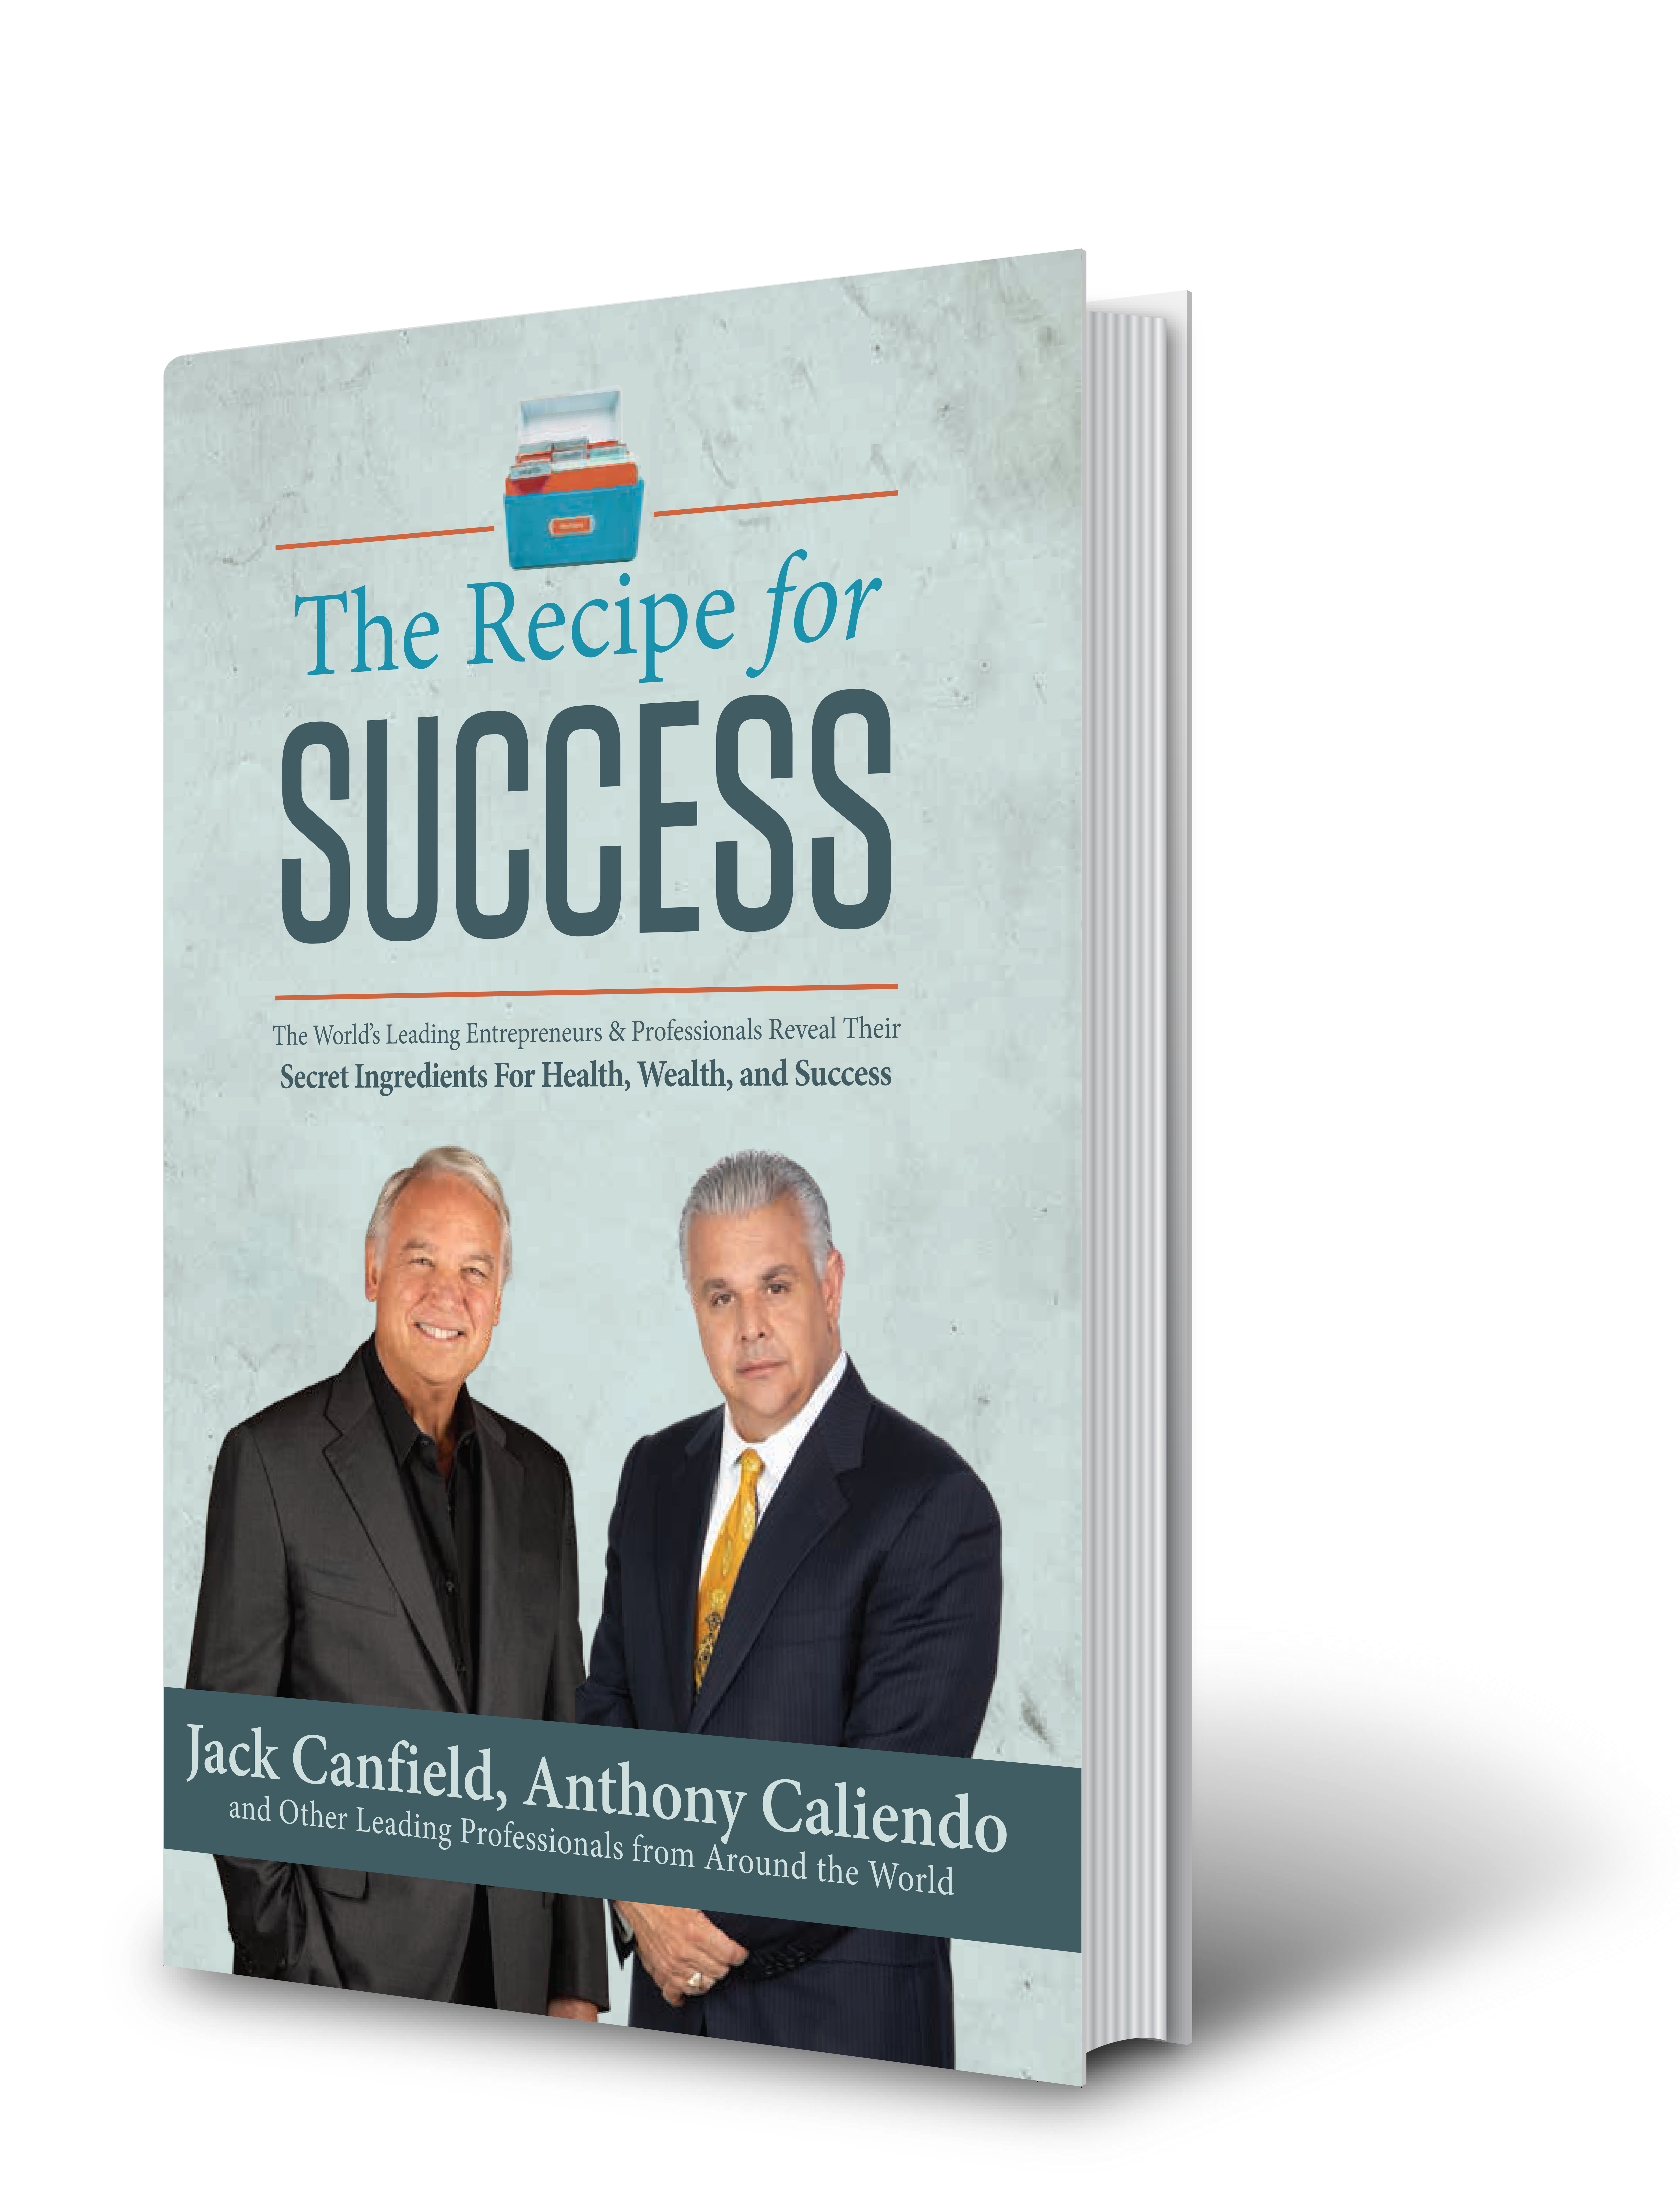 The Recipe for SUCCESS by Anthony Caliendo co-written with Jack Canfield